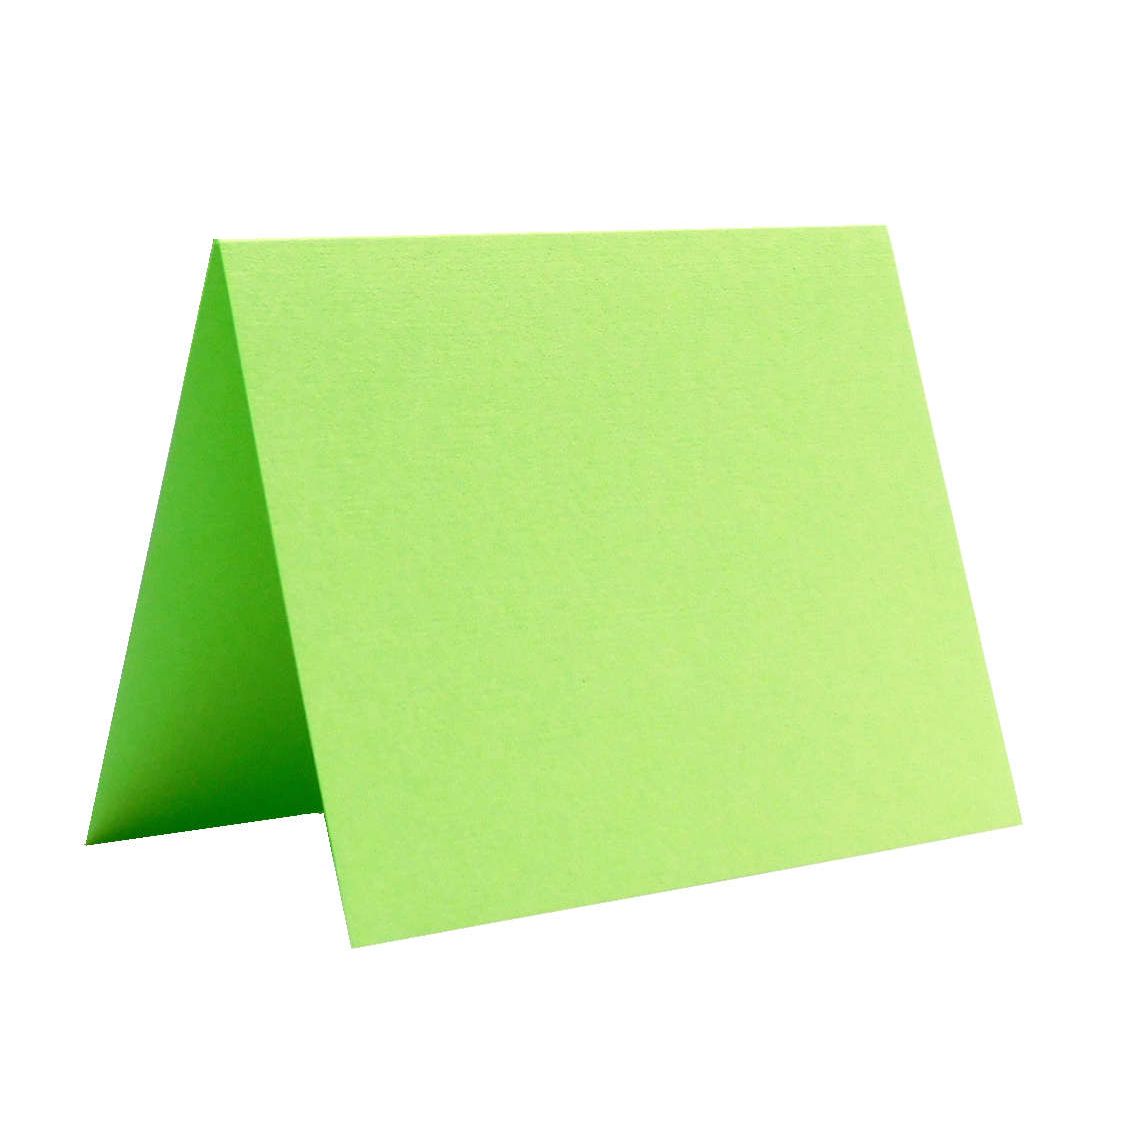 Clearance] BASIS COLORS - 8.5 x 11 CARDSTOCK PAPER - Light Yellow